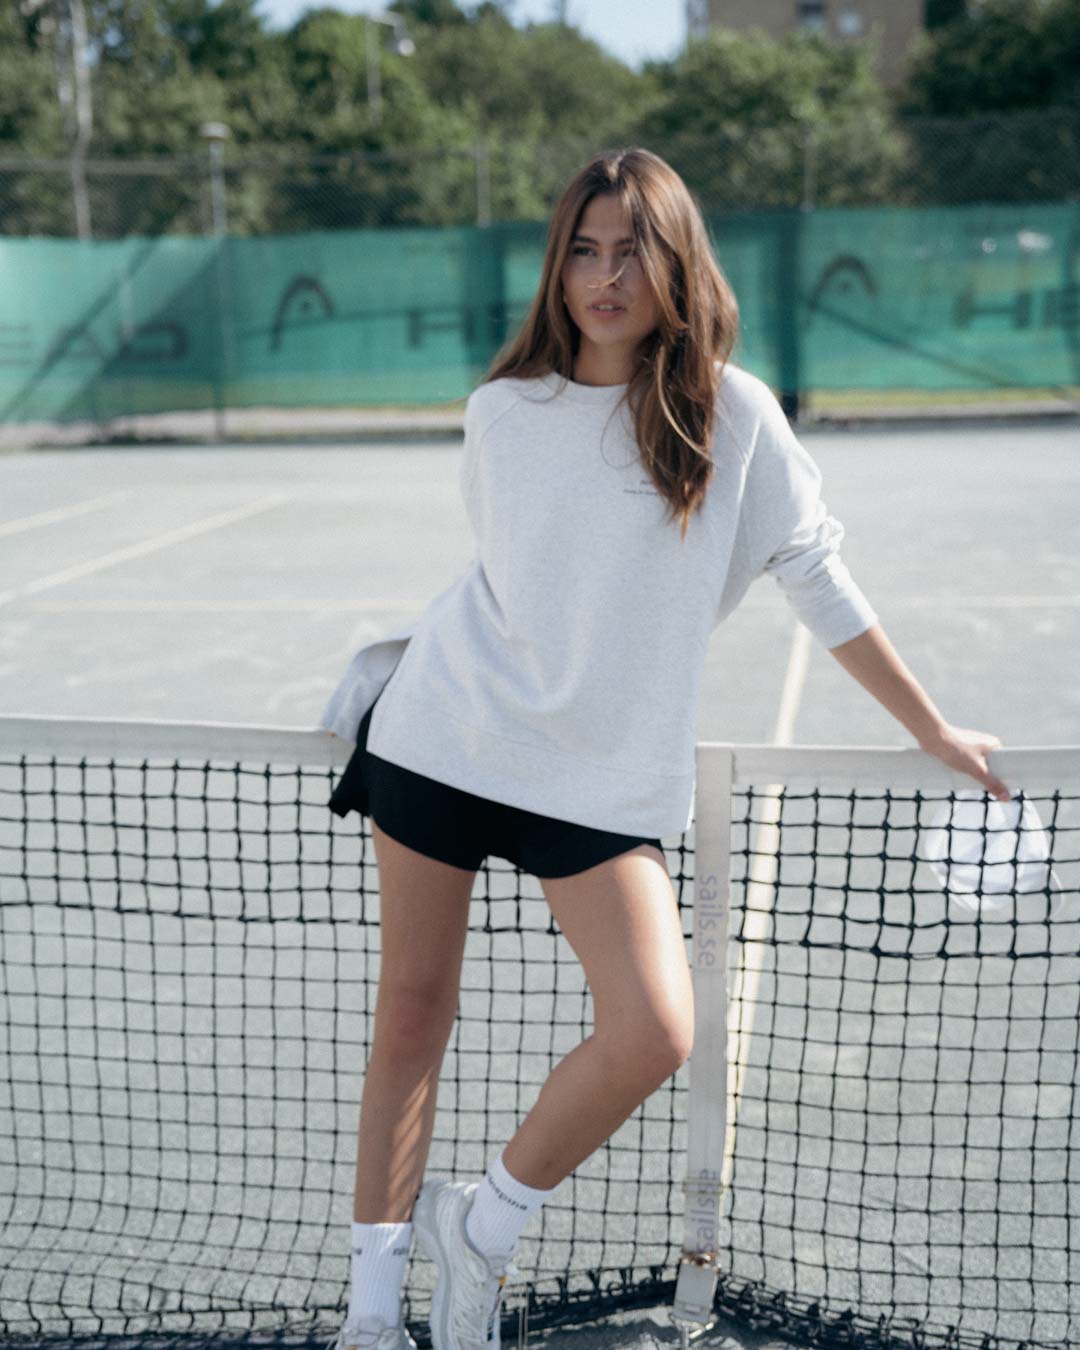 Woman posing on tennis court net in shorts and oversized sweater